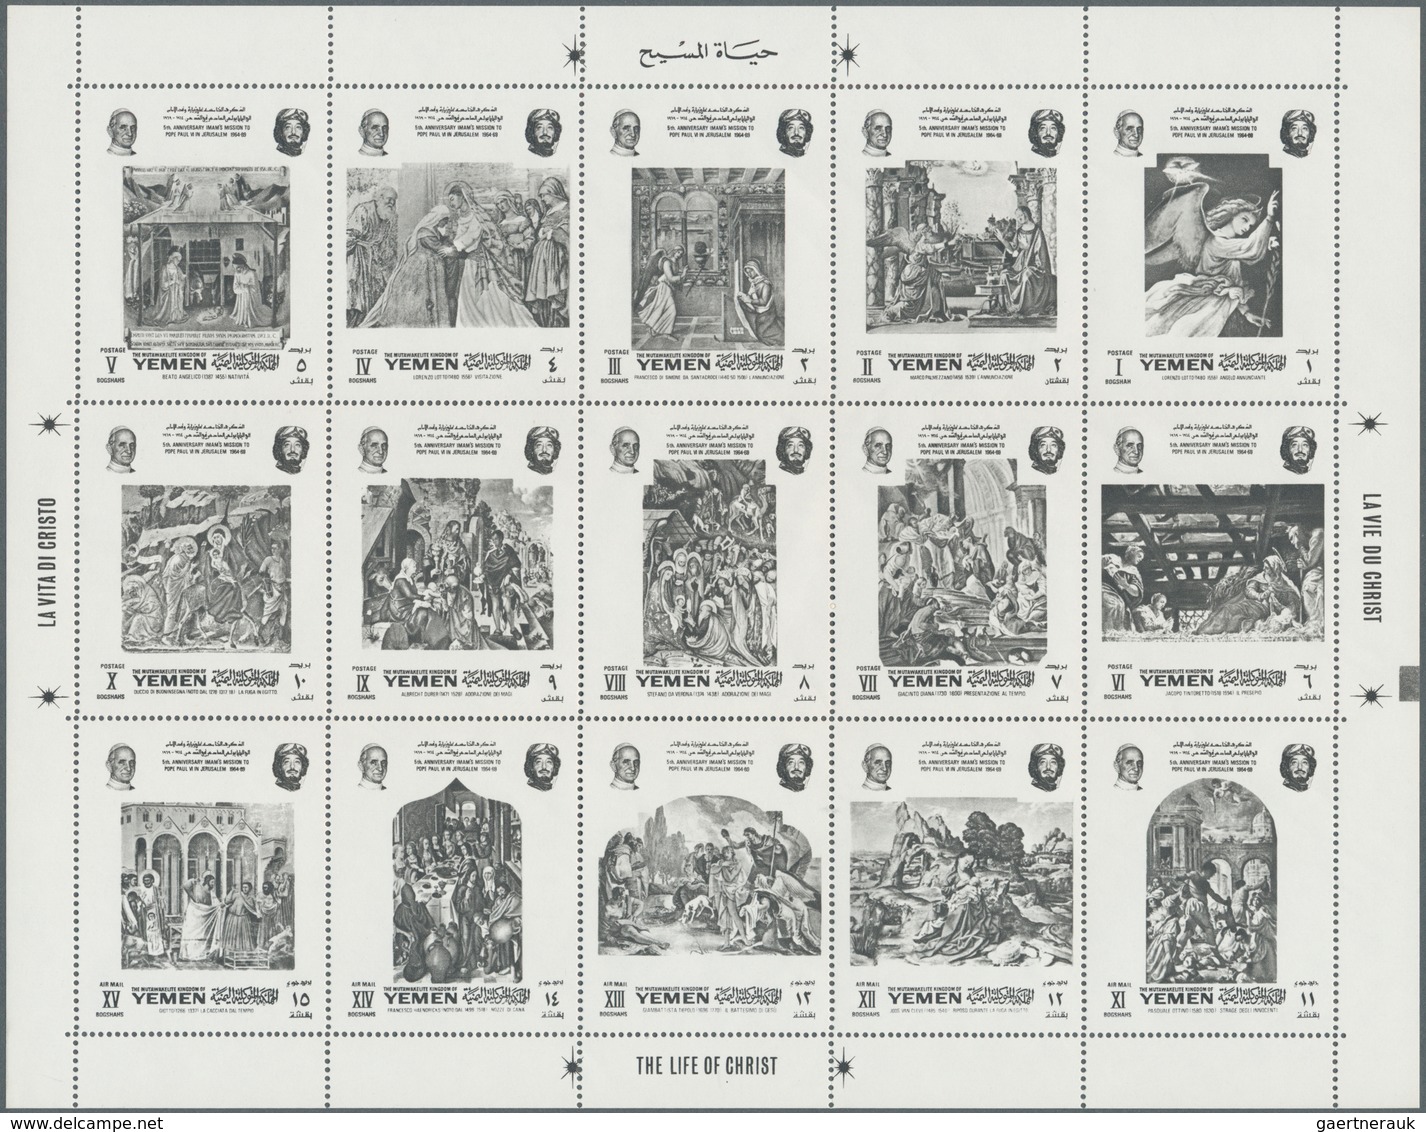 23235 Jemen - Königreich: 1969, Paintings from the life of Christ (perf. se-tenant sheet of 15 stamps): ei